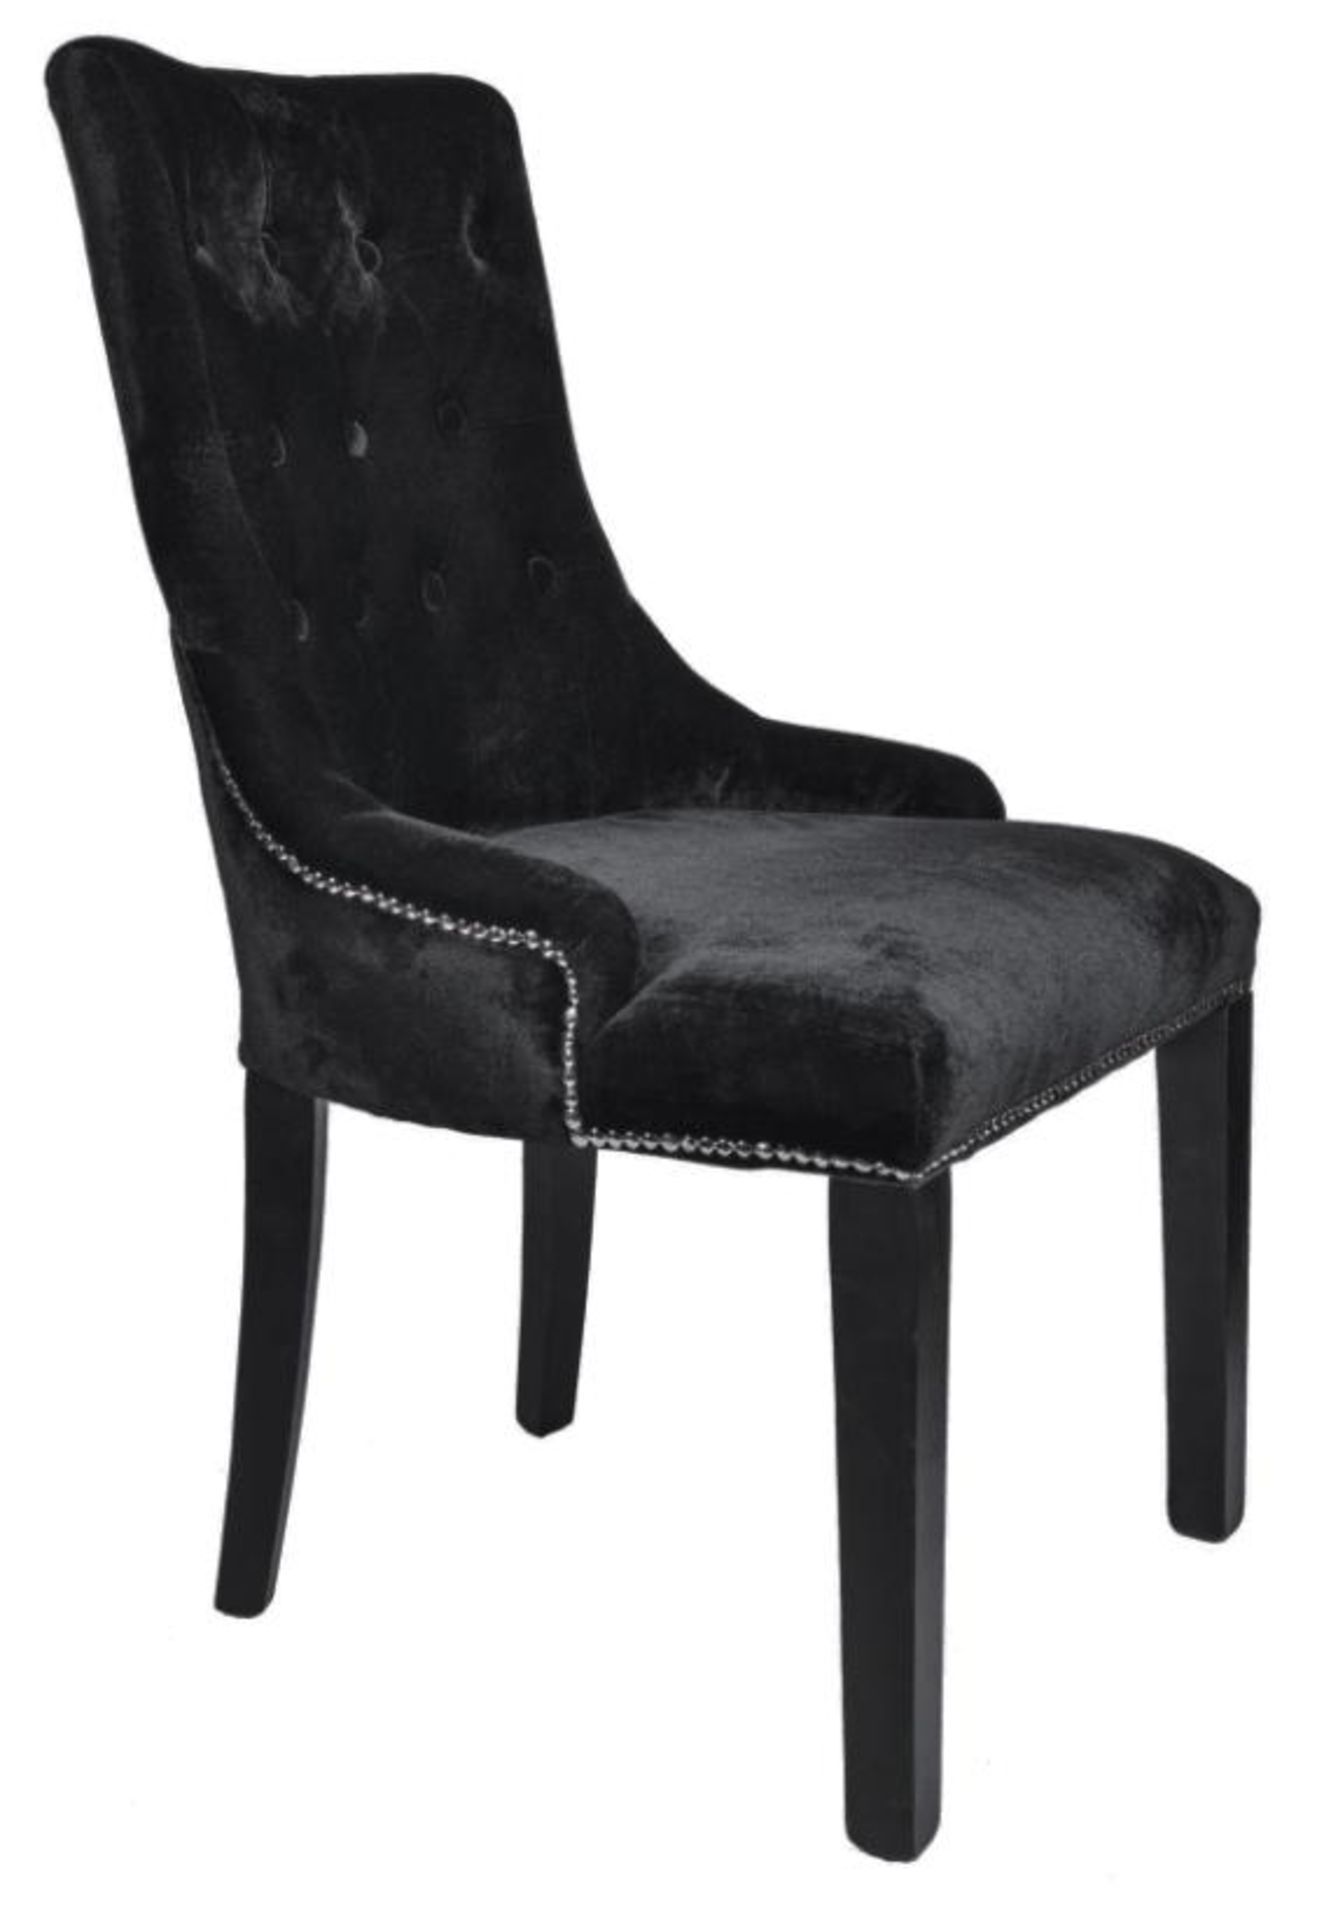 6 x HOUSE OF SPARKLES Luxury Vintage-style 'LION' Button-Back Dining Chairs Richly Upholstered In - Image 2 of 11